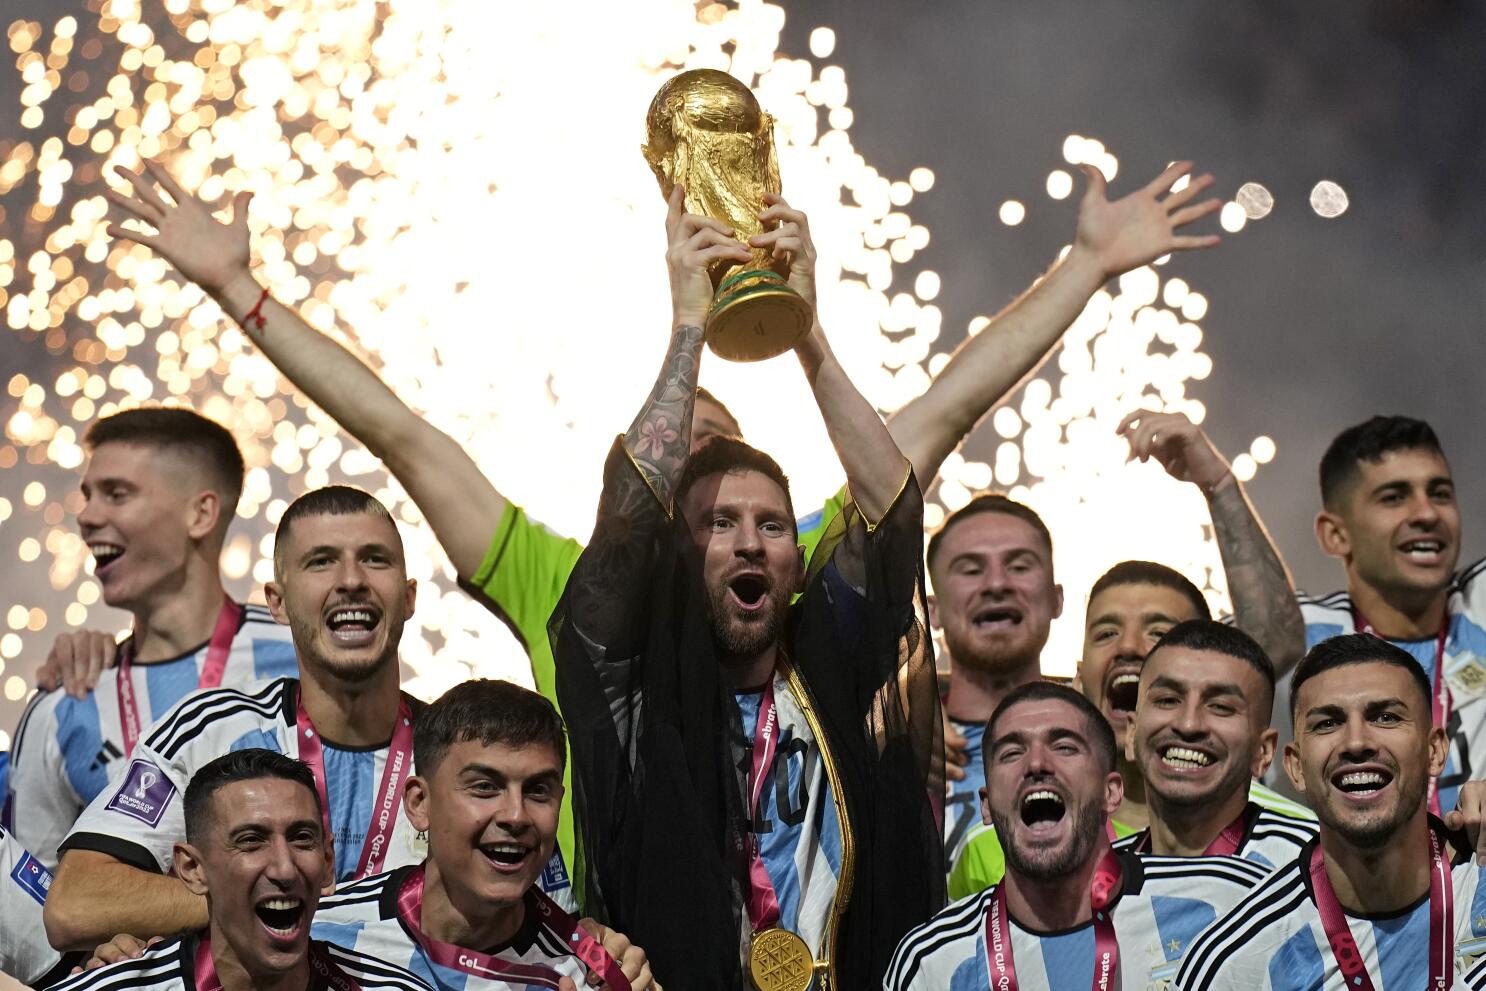 World Cup: Winners, all-time top scorers & complete guide to